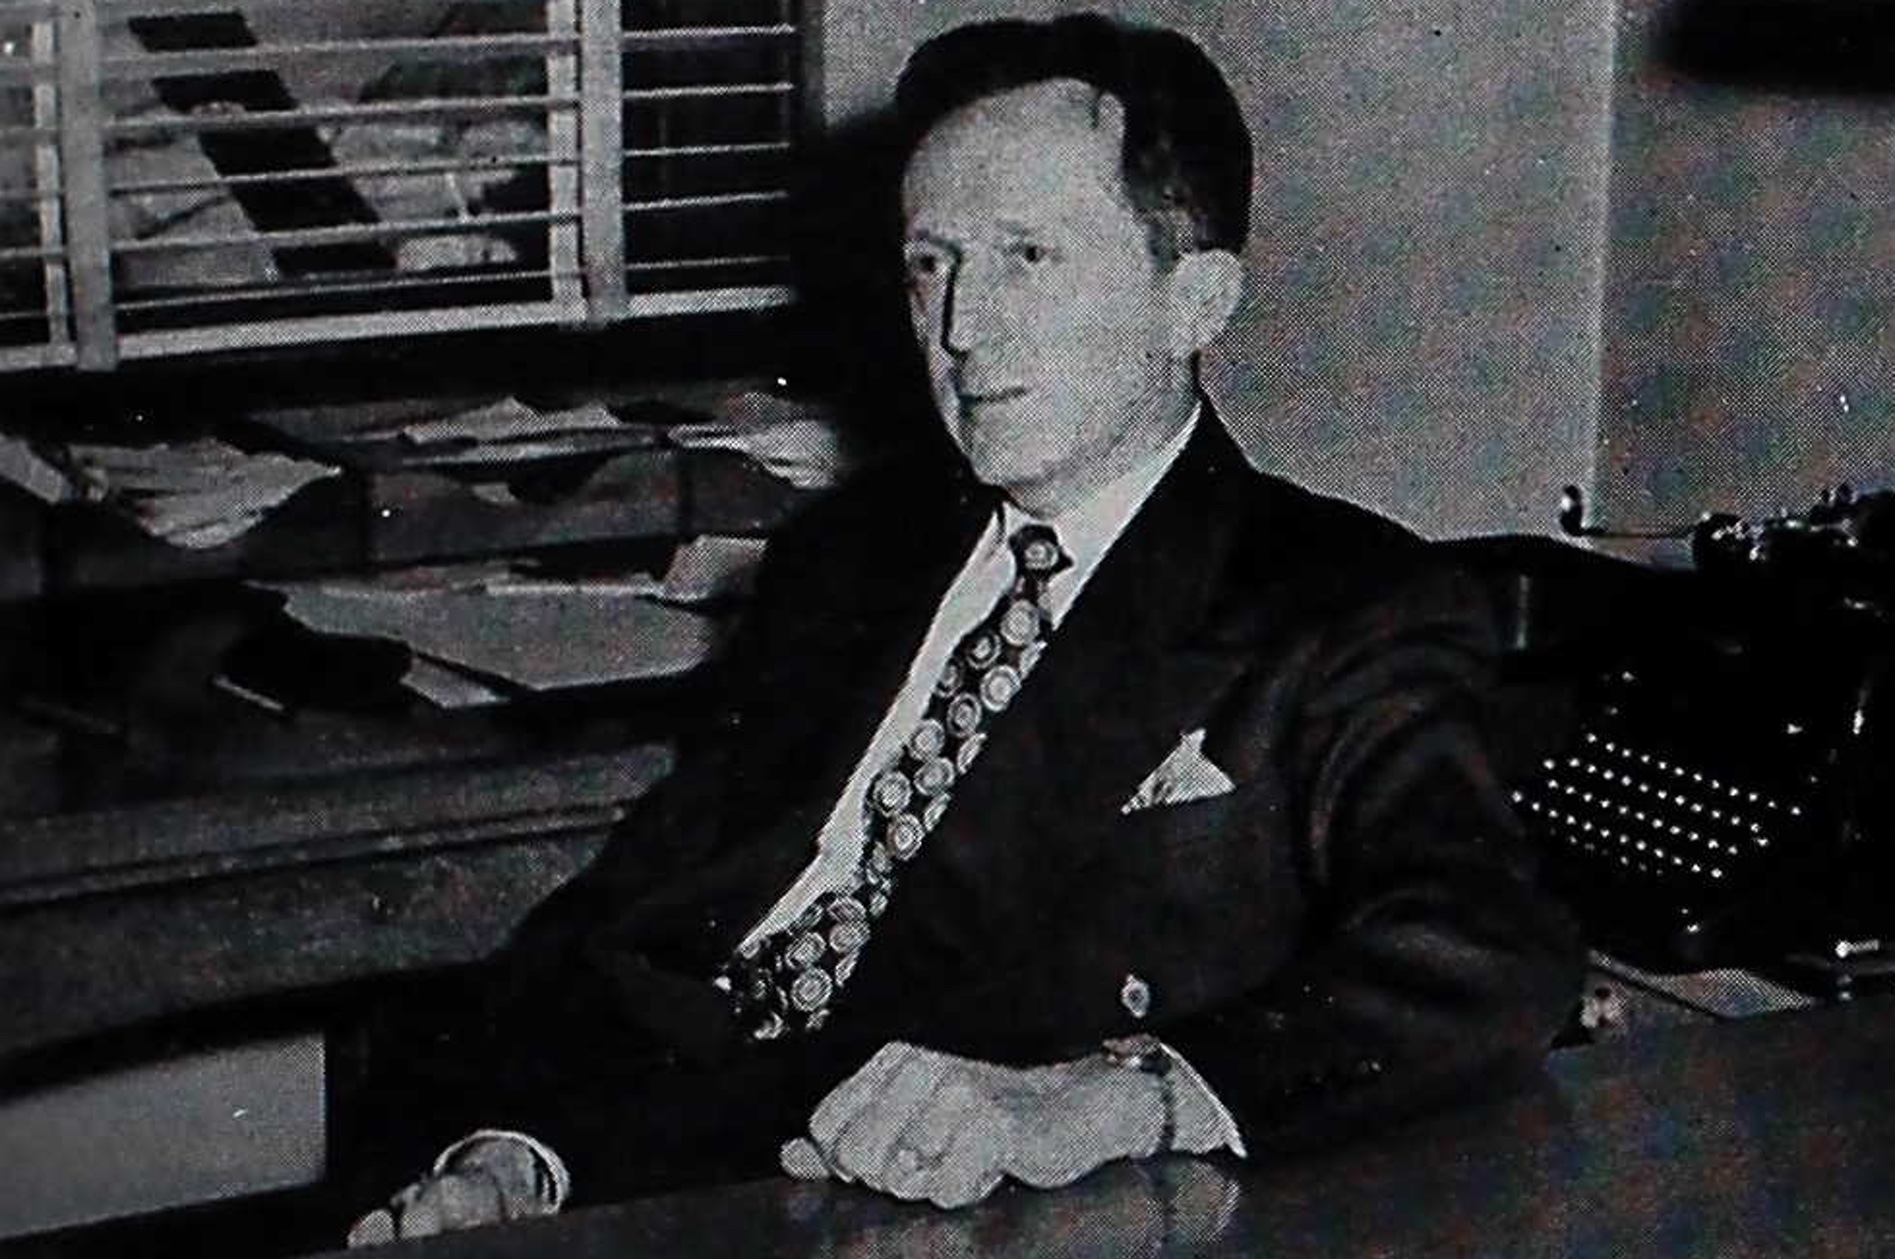 MU advertising professor EK Johnston hosted parties for gay men in the 1940s off campus. In 1948, he was fired and criminally charged for being gay. 